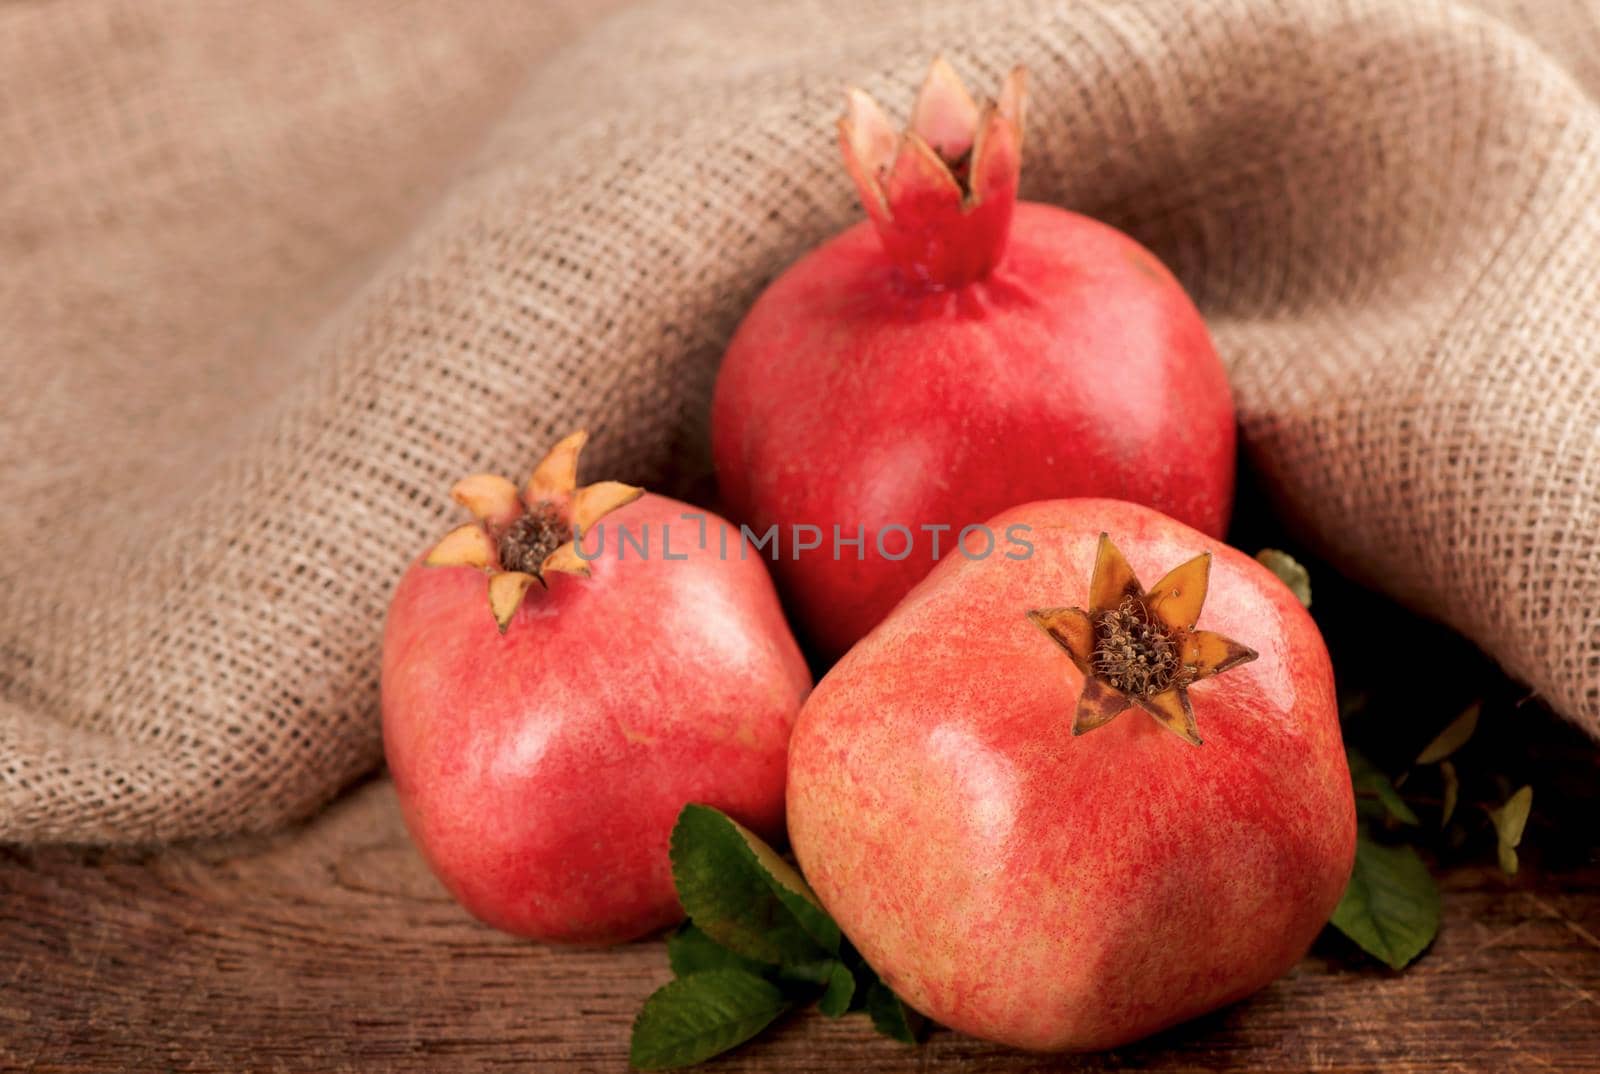 Pomegranate on wooden boards and simple fabric